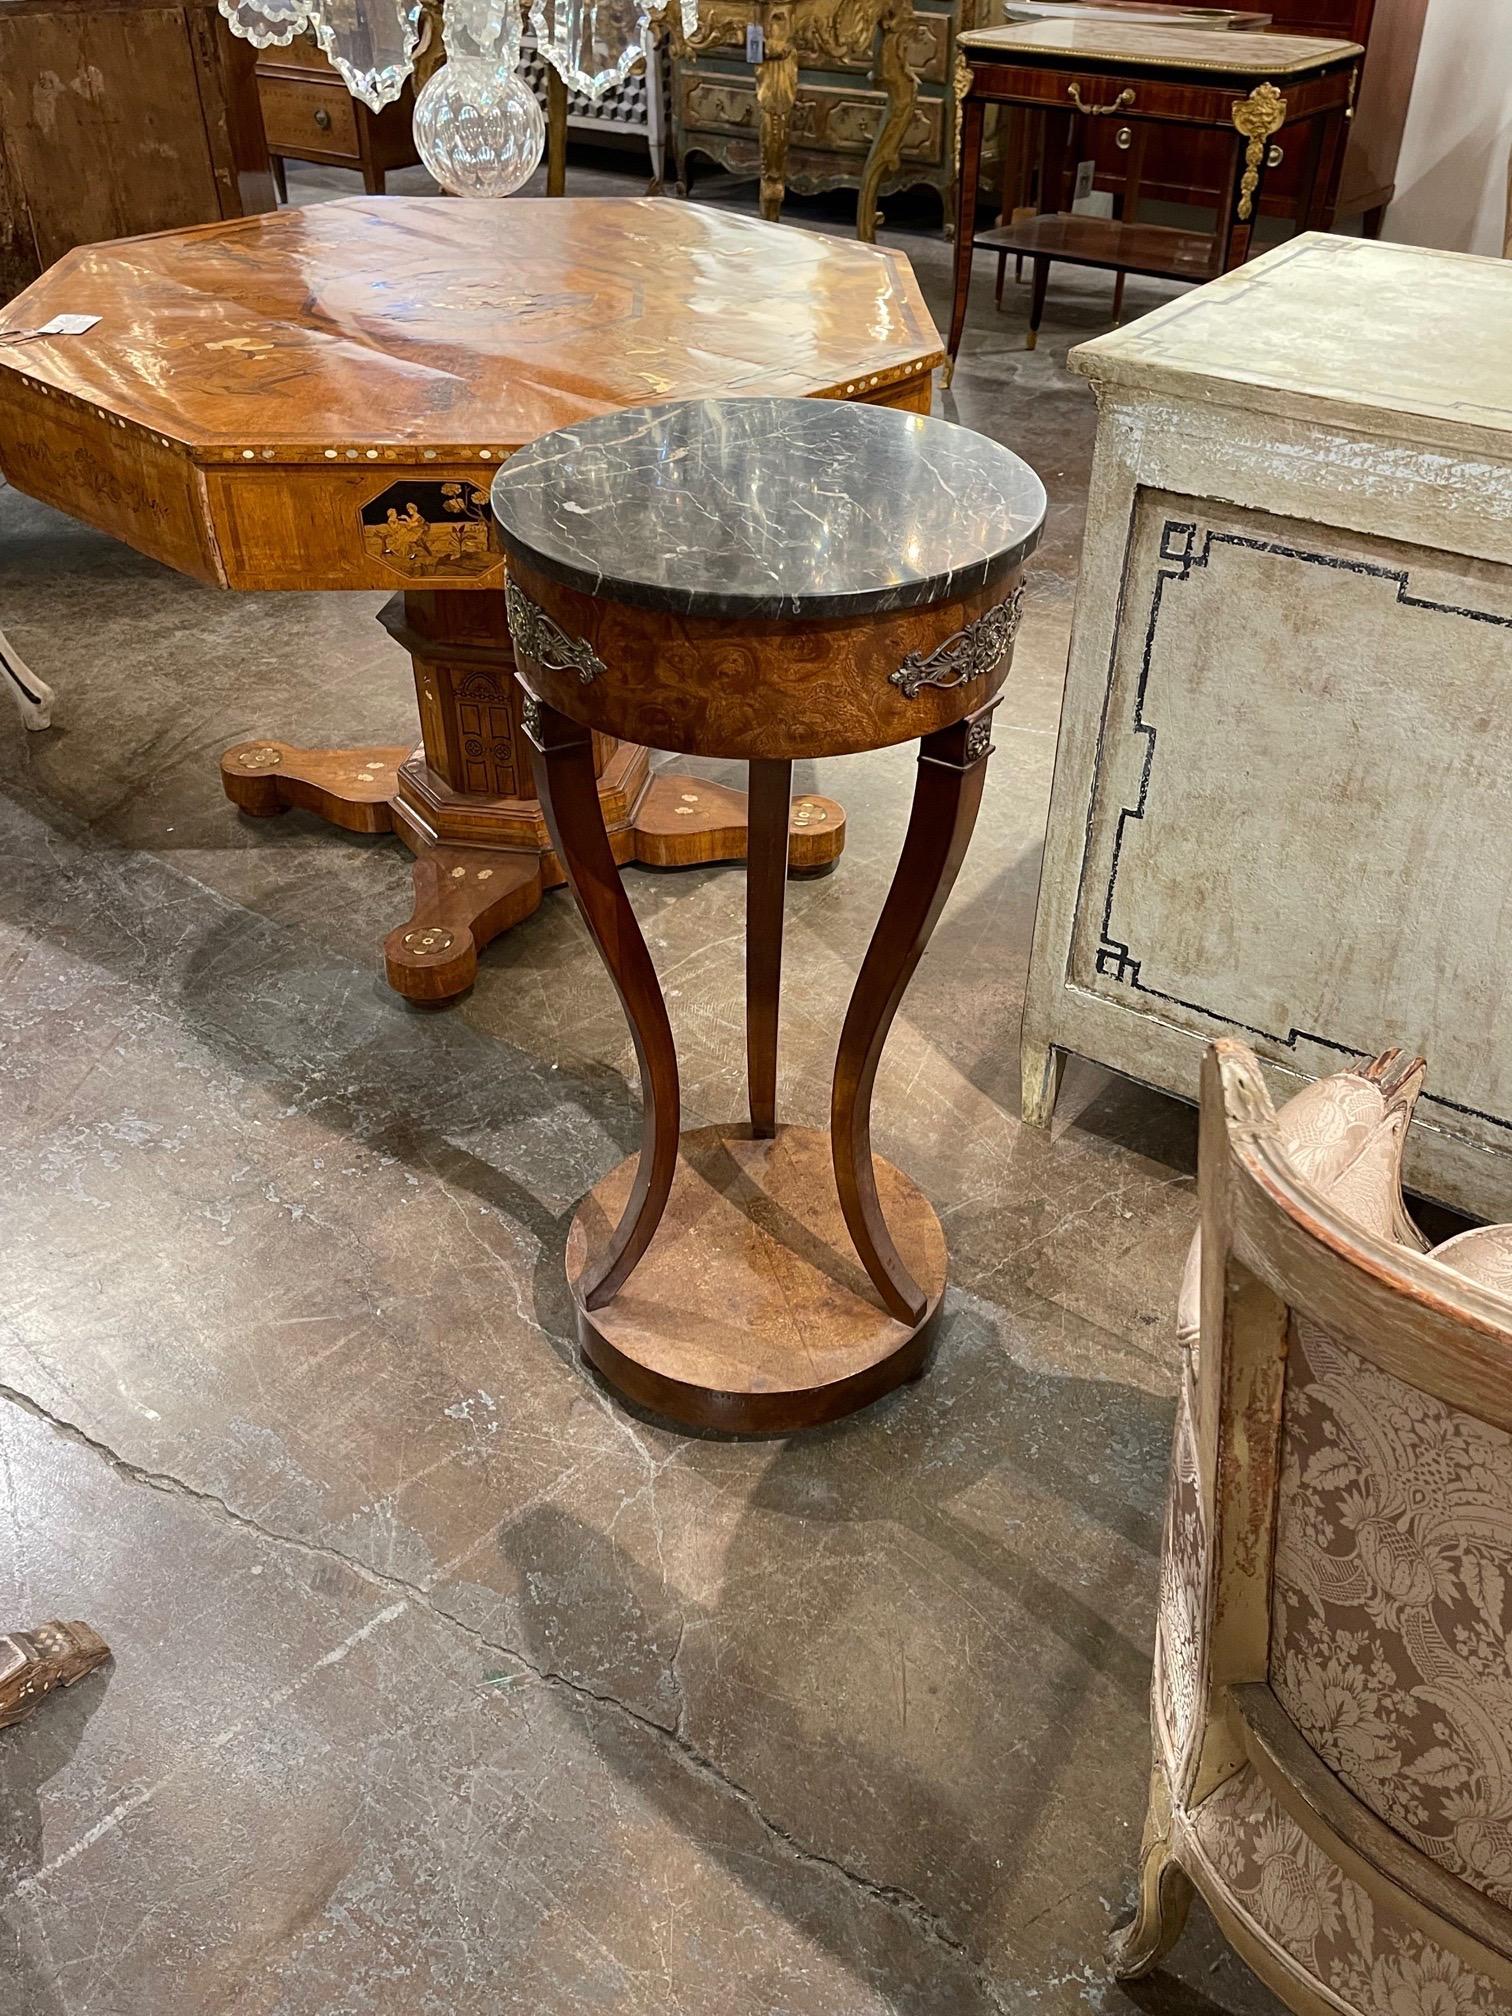 Elegant 19th century French burl walnut pedestal with marble top and brass mounts. A fabulous accent piece!